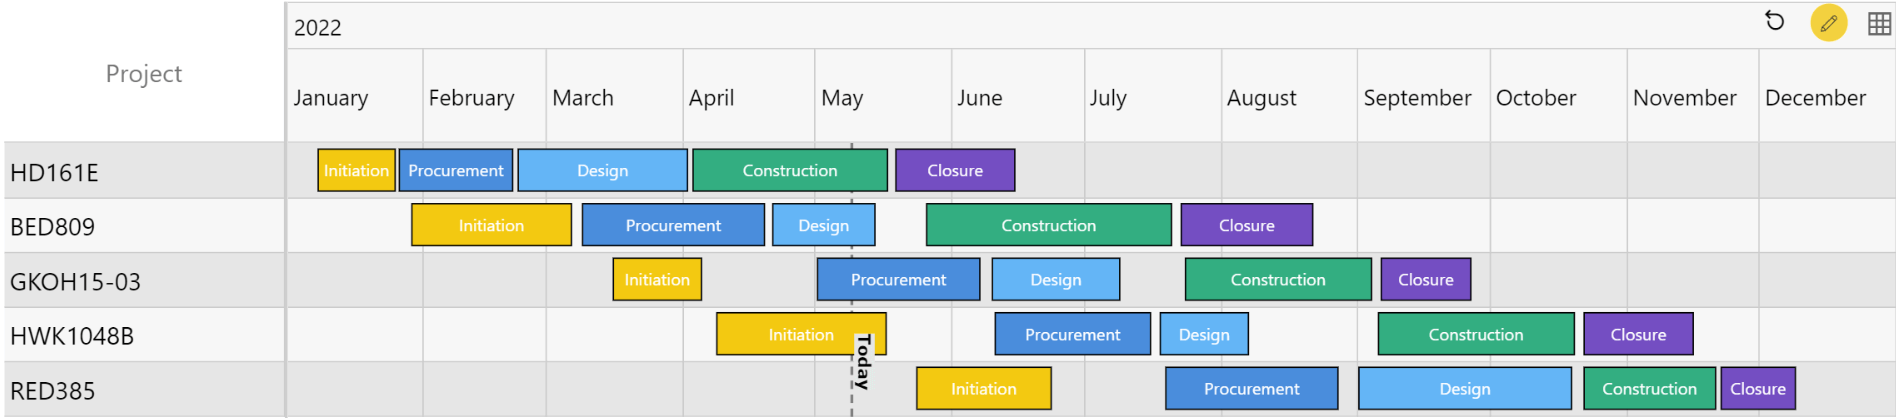 managing-projects-with-multiple-phases-in-power-bi-using-gantt-chart-2